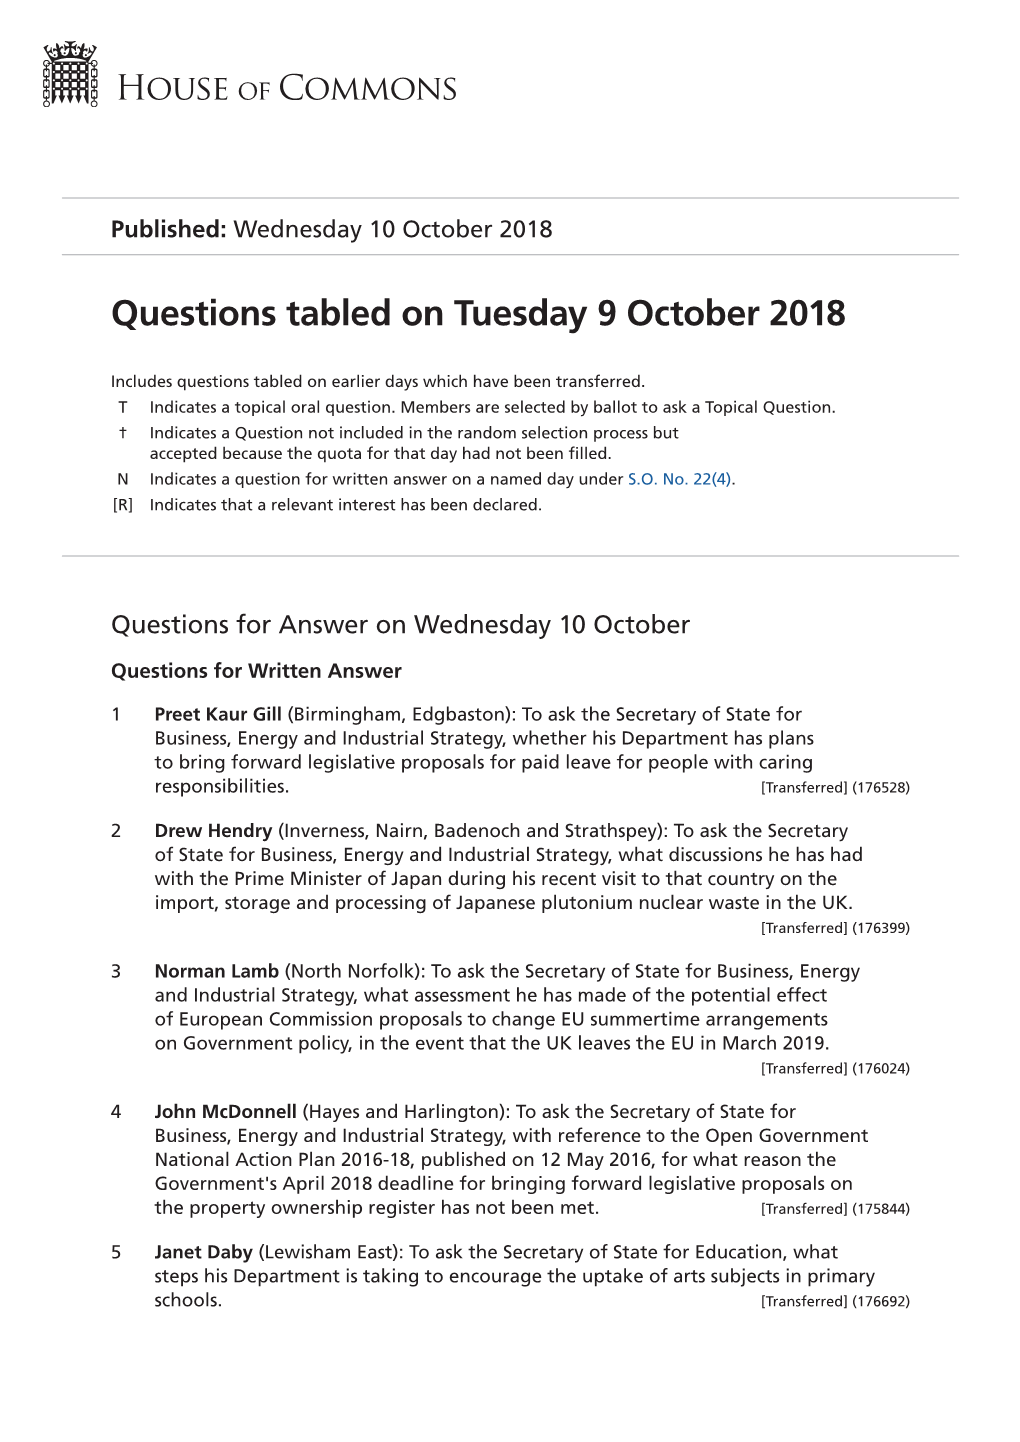 Questions Tabled on Tue 9 Oct 2018